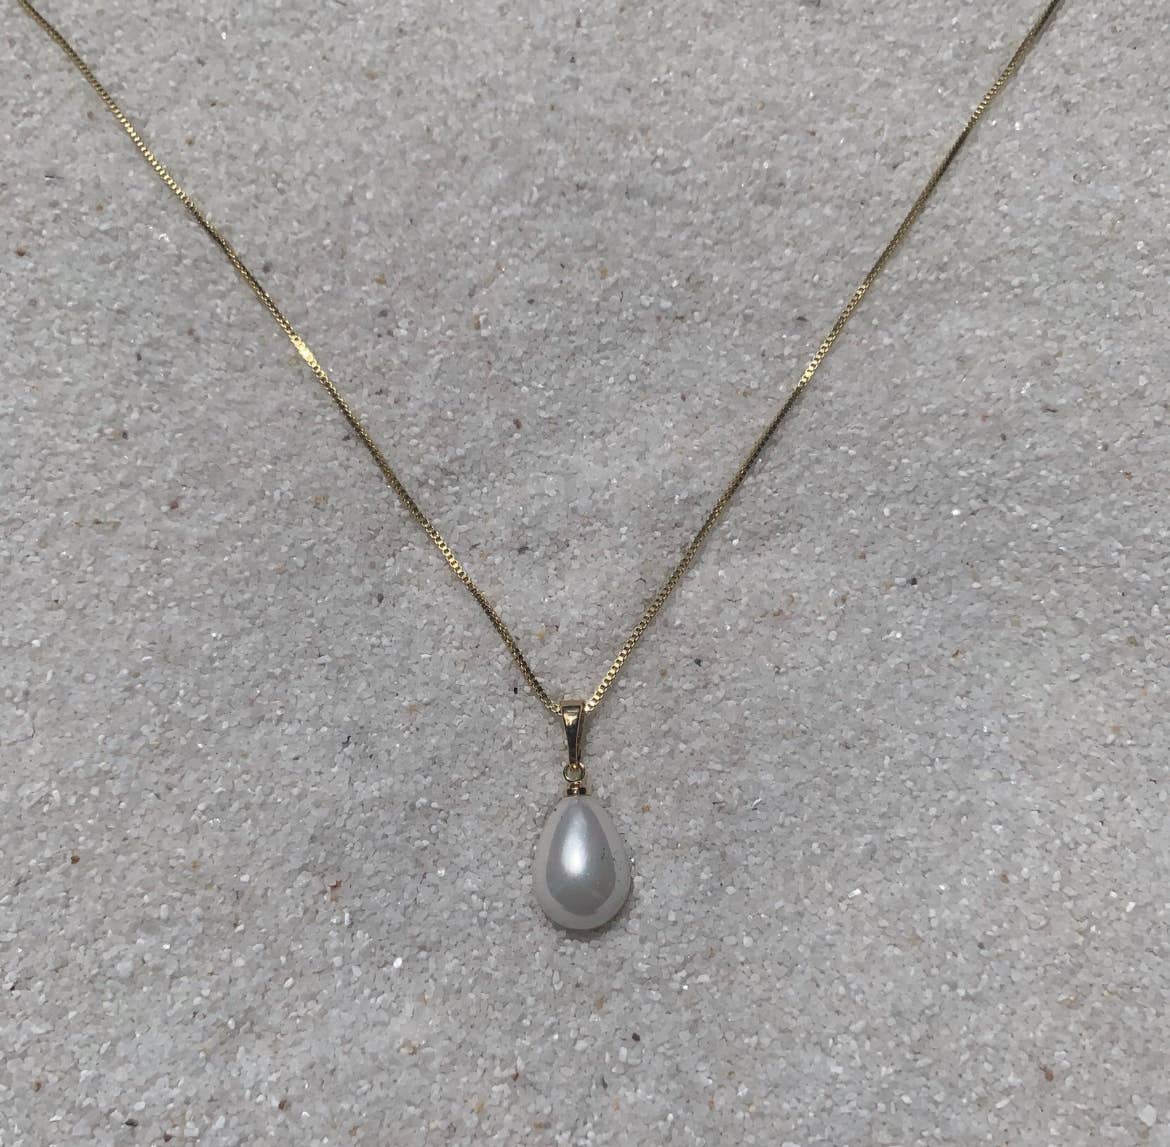 Drops Of Jupiter Pearl Necklace. 14k gold box chain necklace